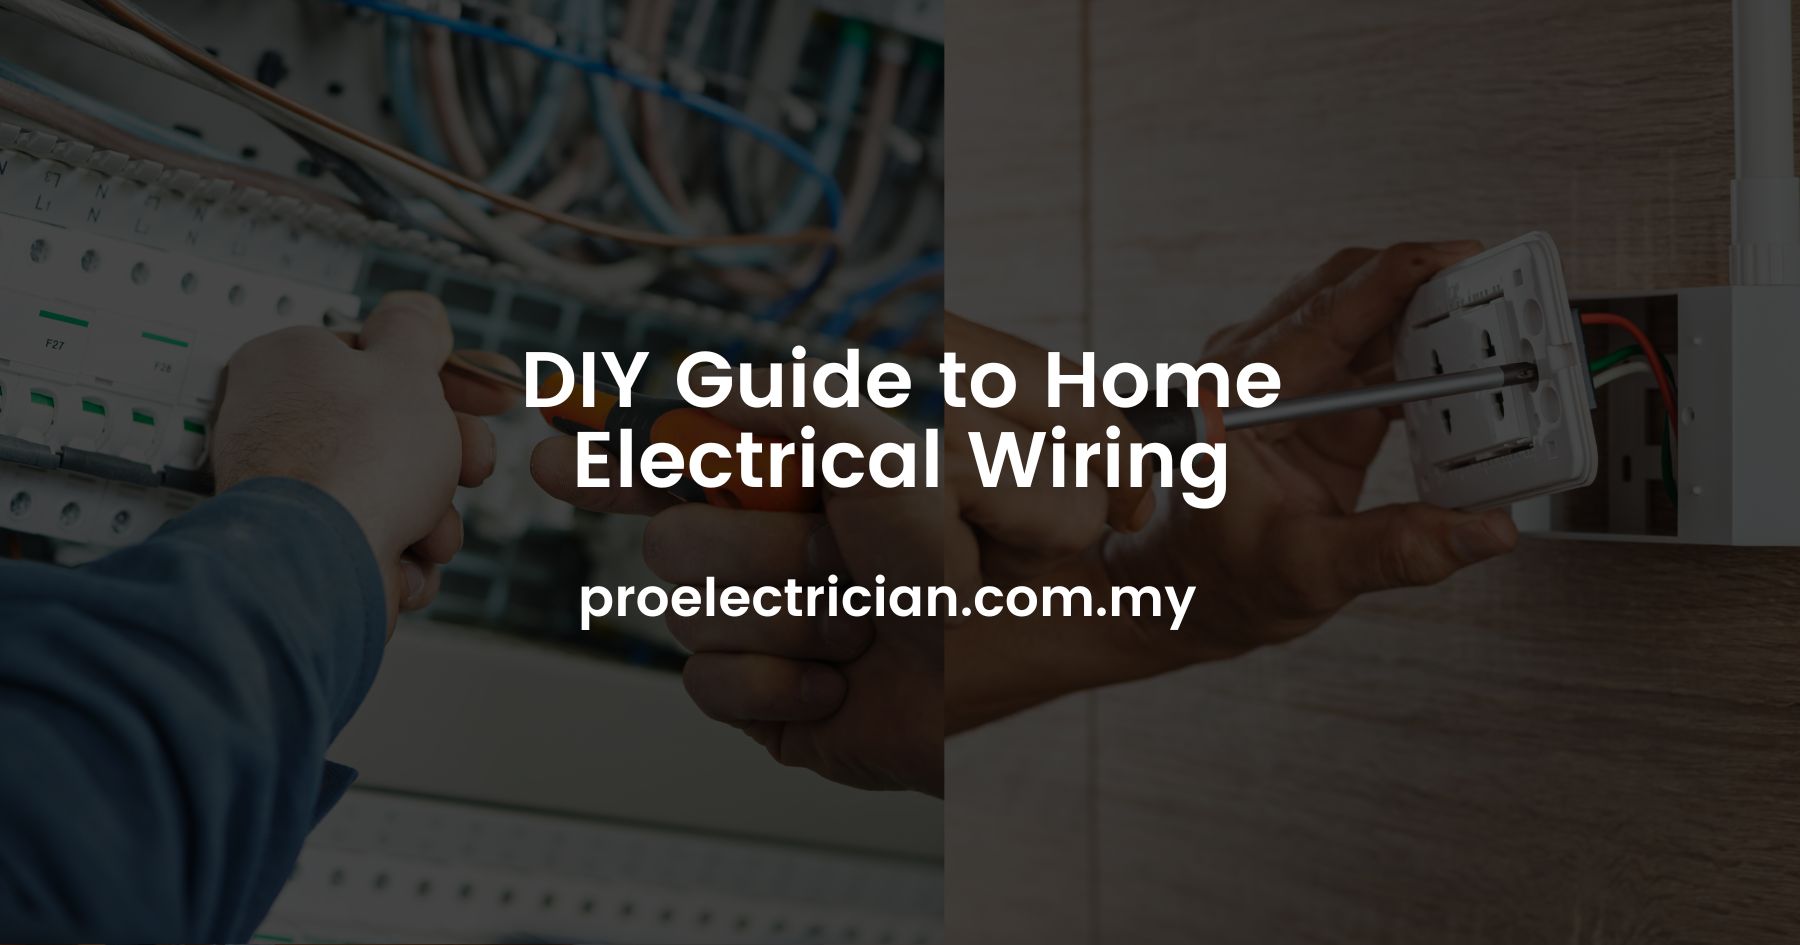 DIY Guide to Home Electrical Wiring